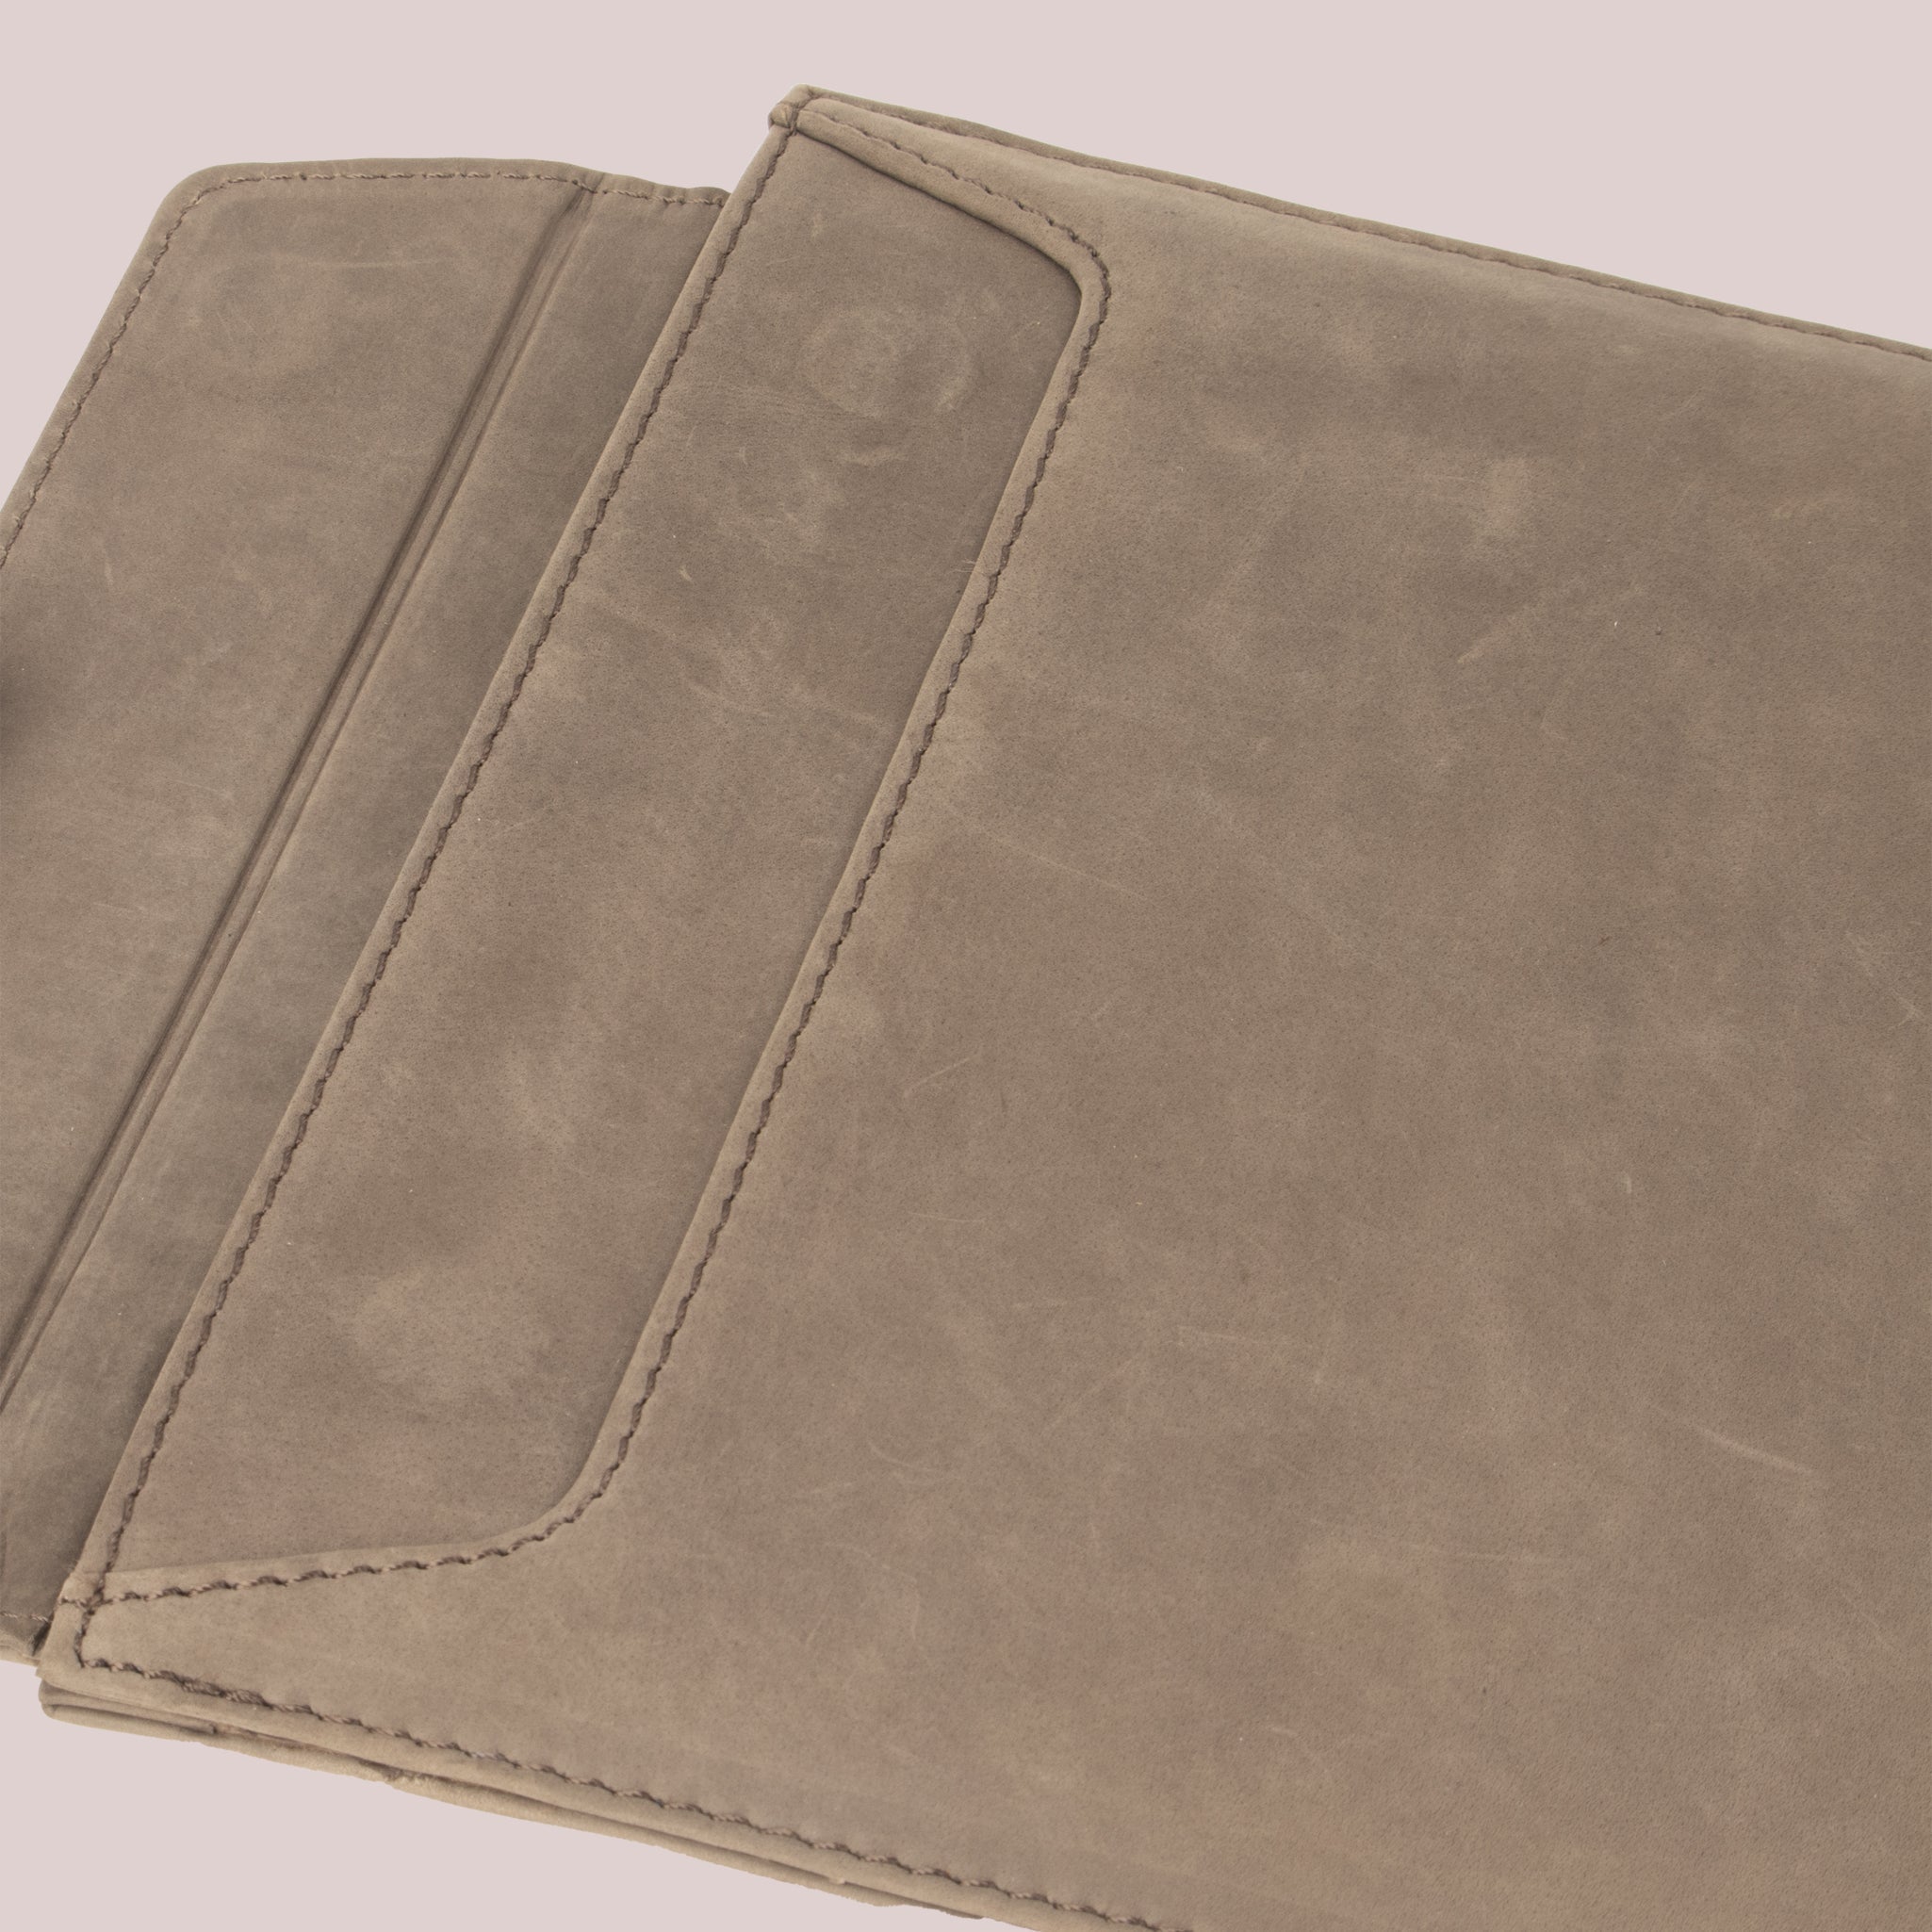 Macbook leather sleeve in a stylish grey color